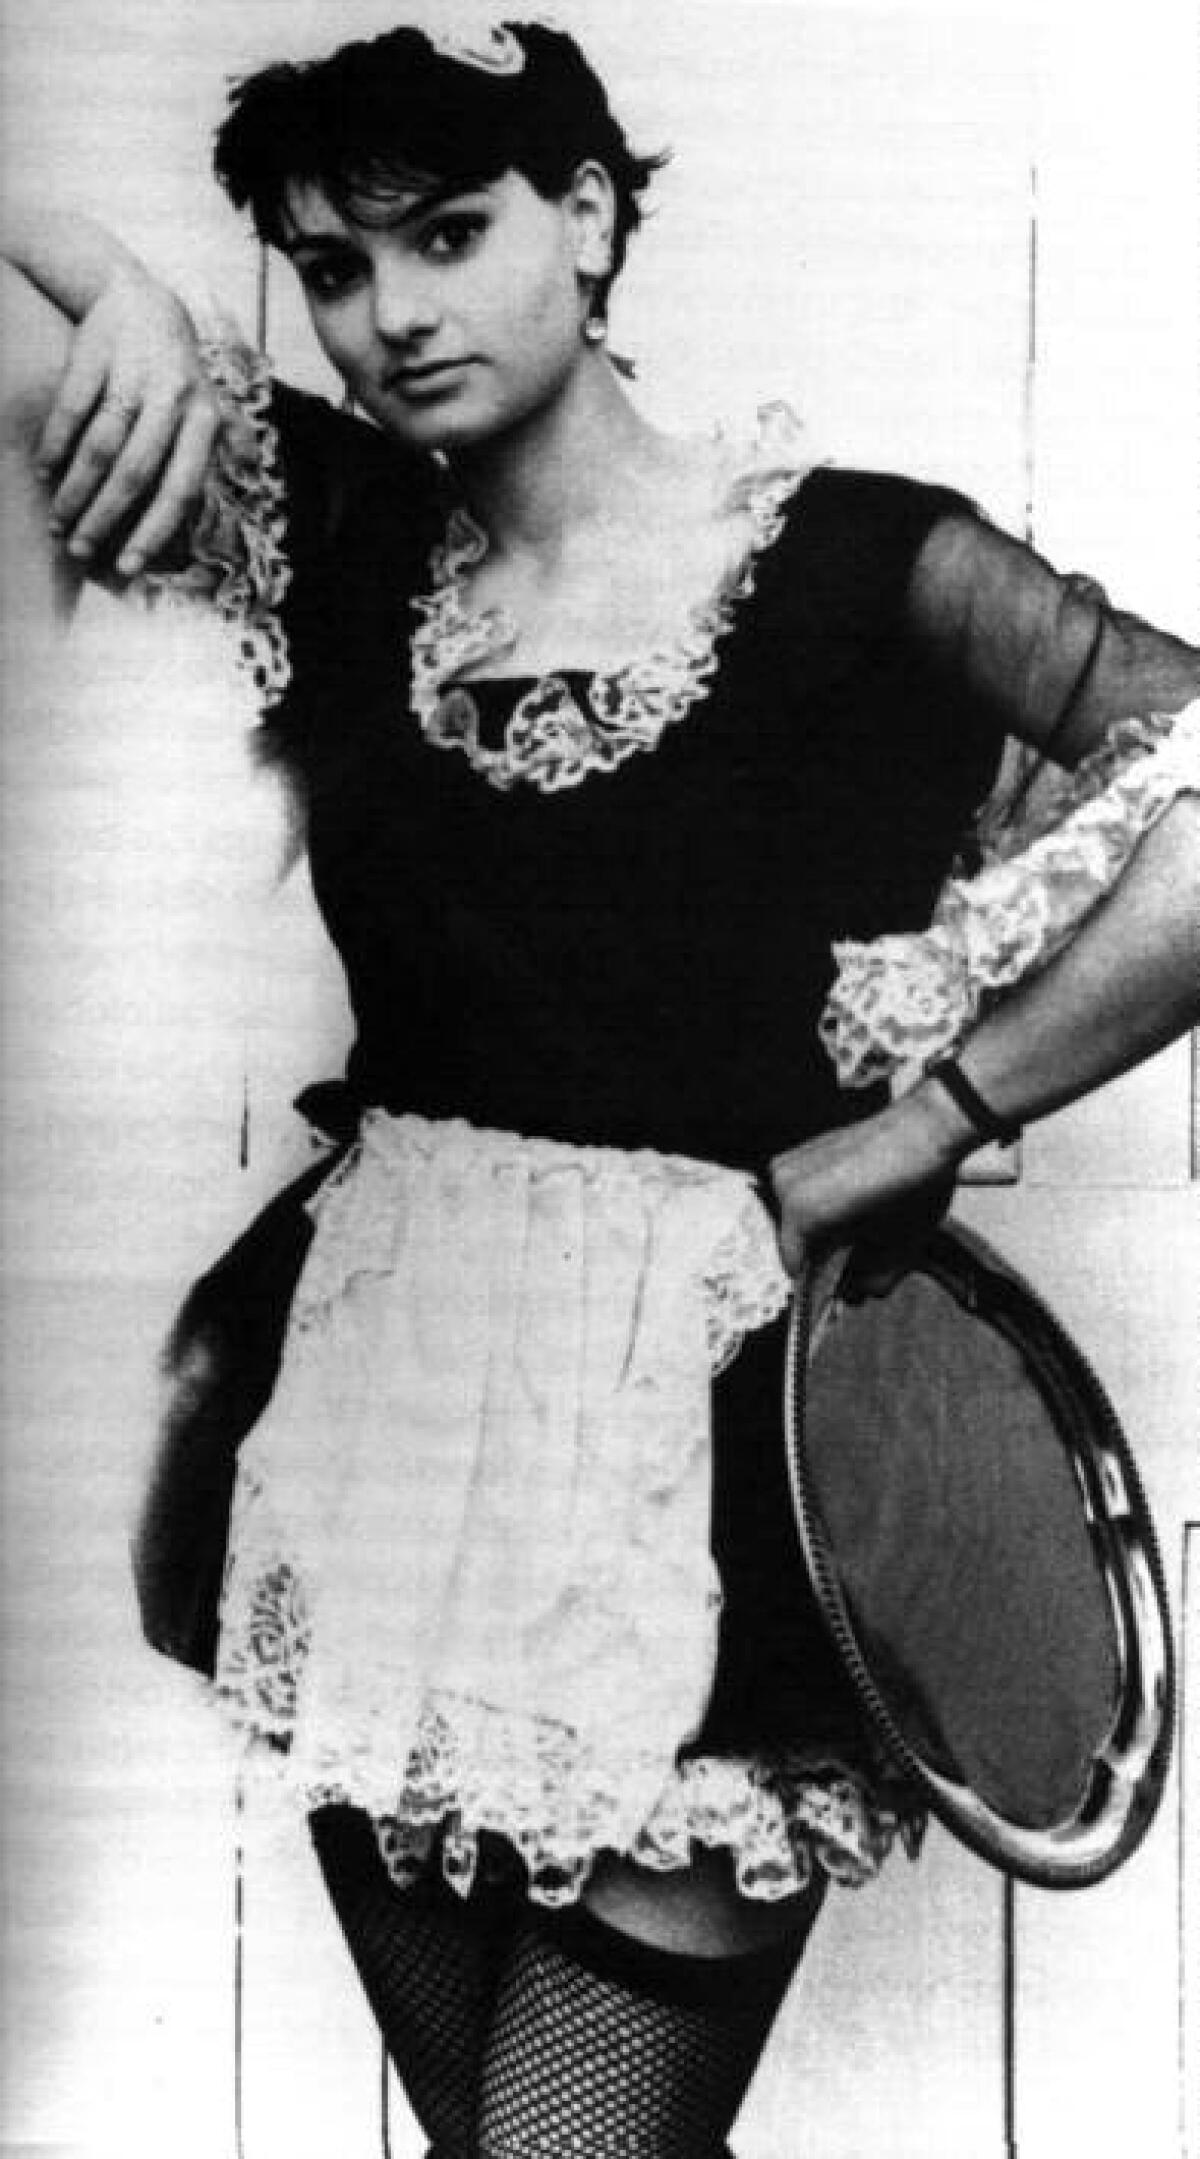 Teenage Sinéad O'Connor dressed in a short waitress dress and fishnet stockings, holding a tray.